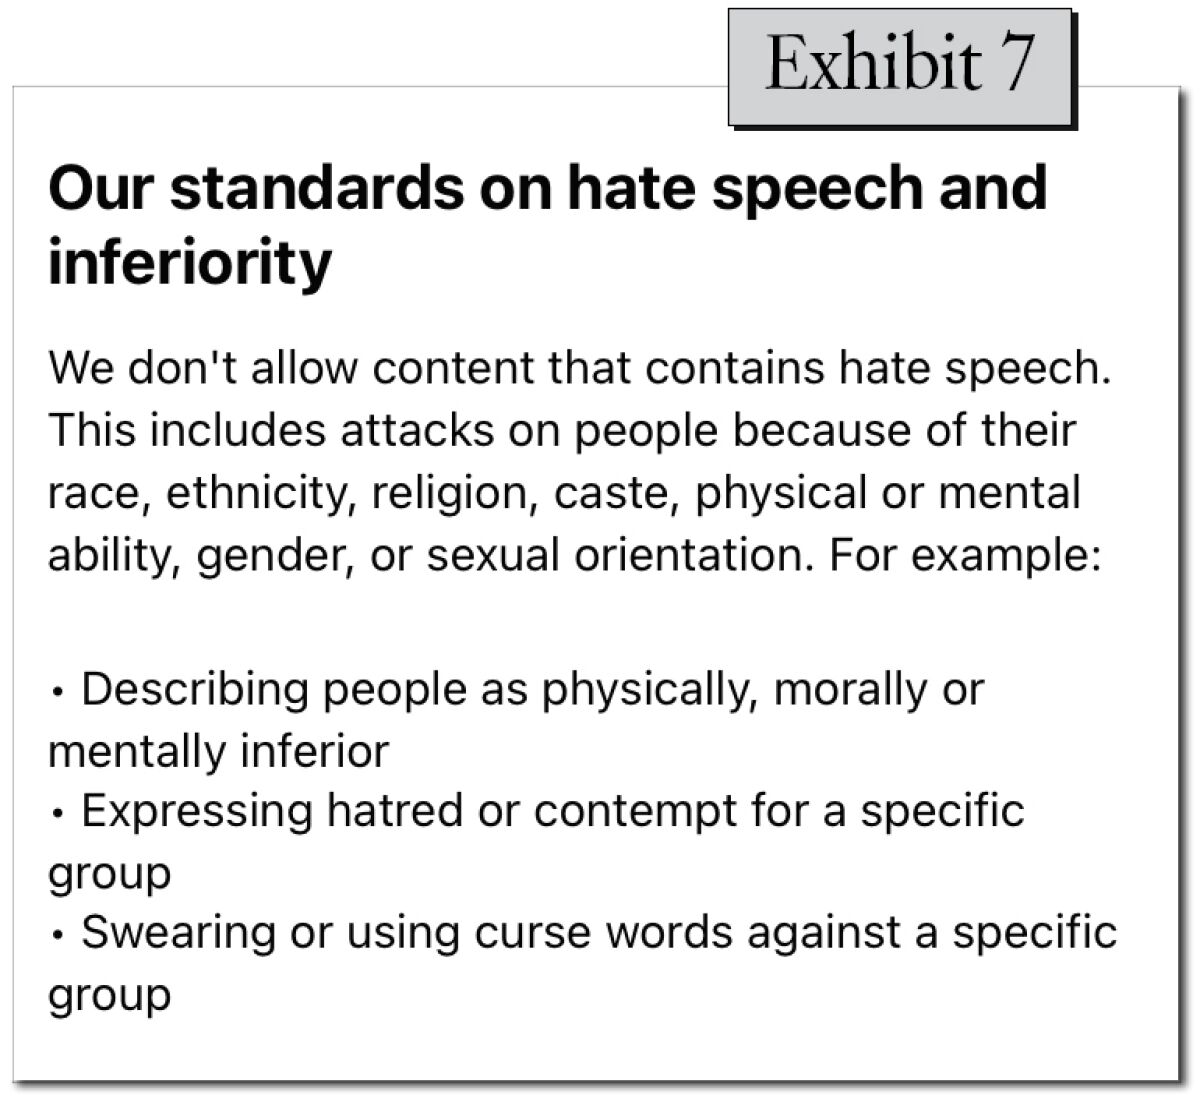 A notification on "Our standards on hate speech and inferiority."